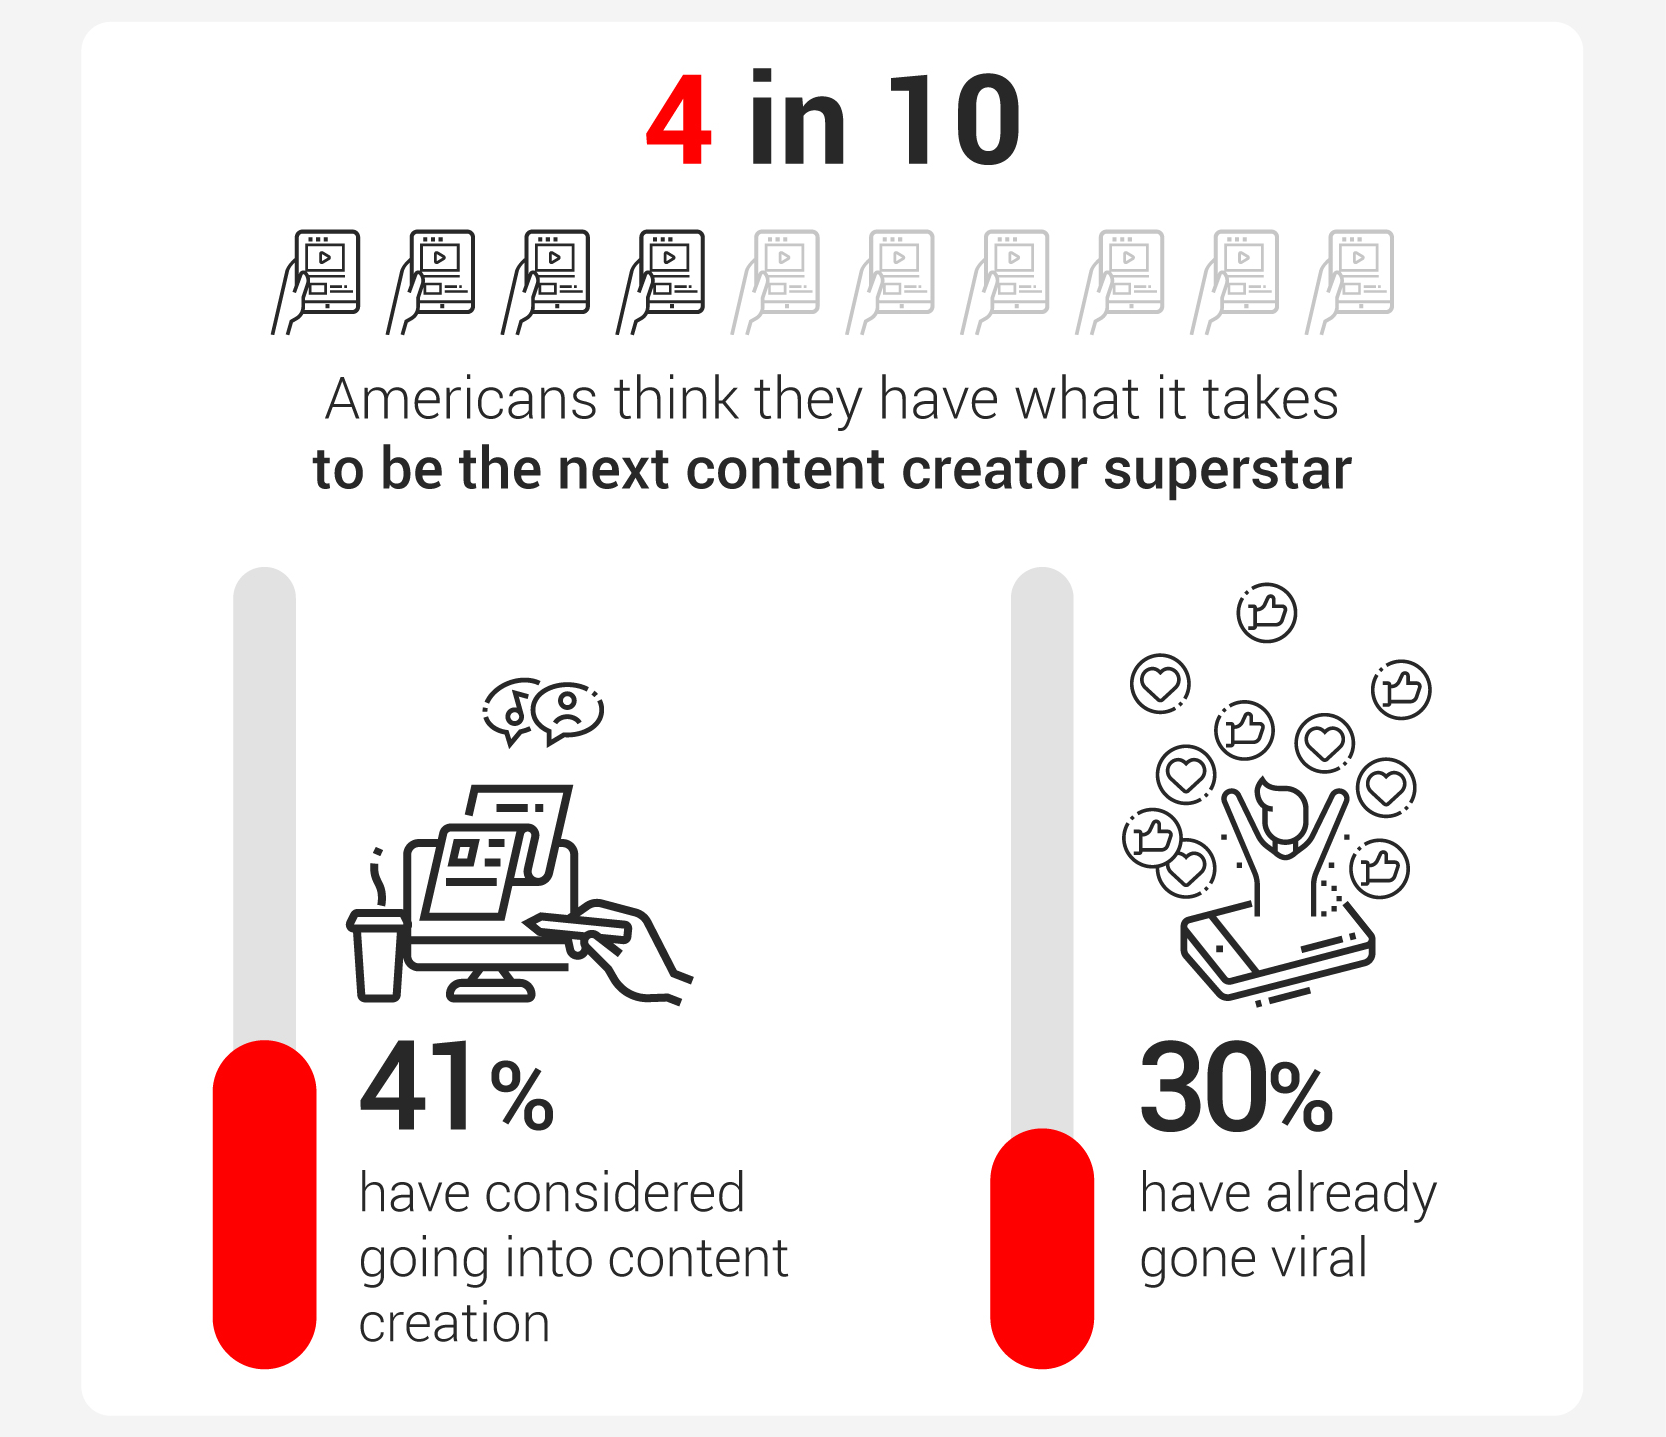 More than half of Americans believe content creation should be treated as a real job